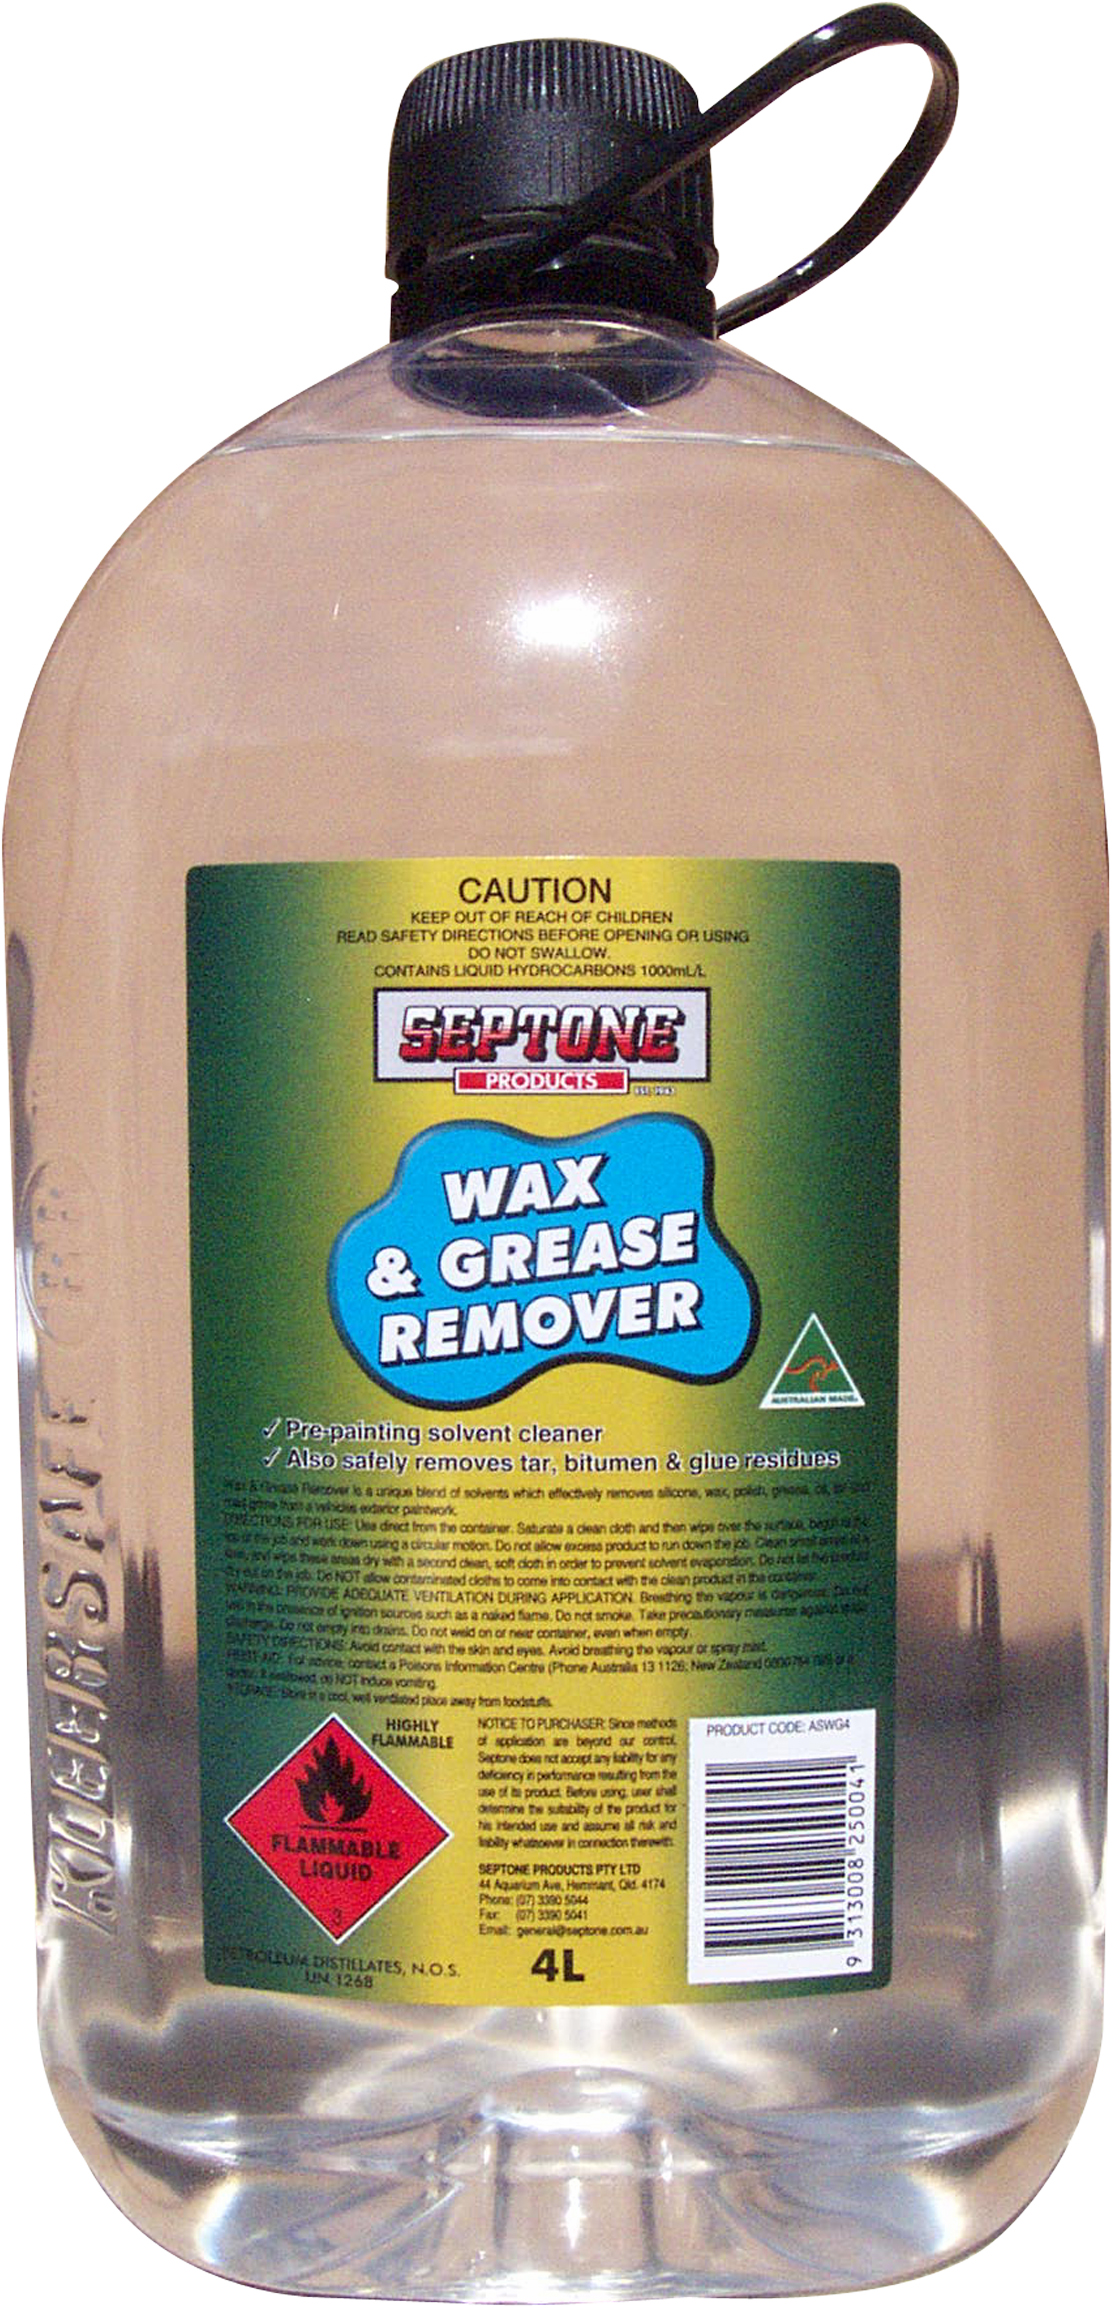 SEPTONE WAX GREASE REMOVER 4L